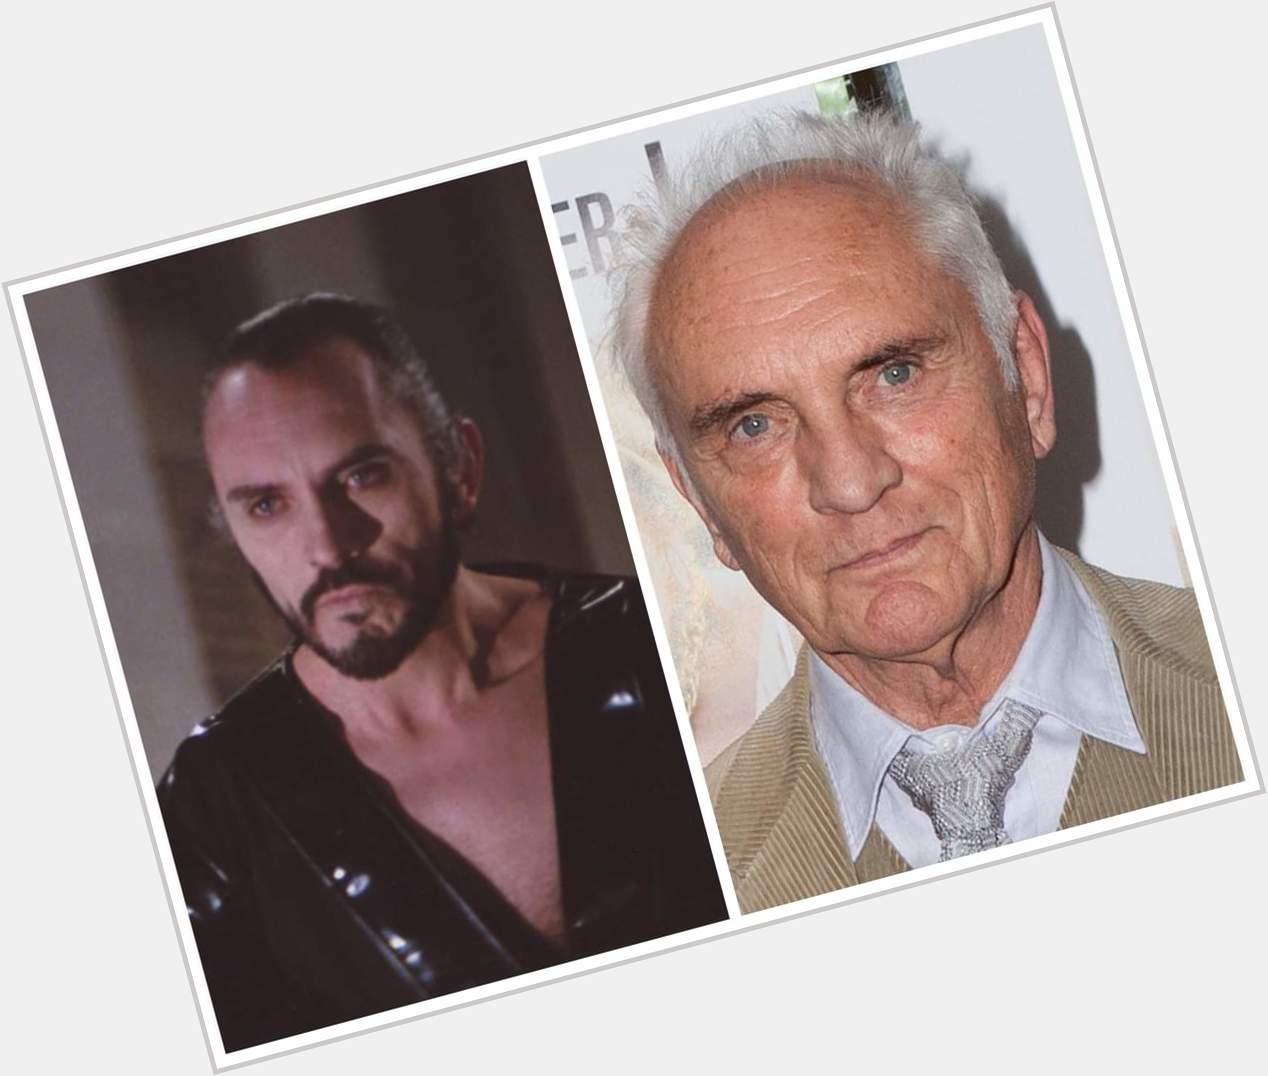 Happy birthday Terence Stamp  General Zod in Superman 2
Born: July 22, 1938.  